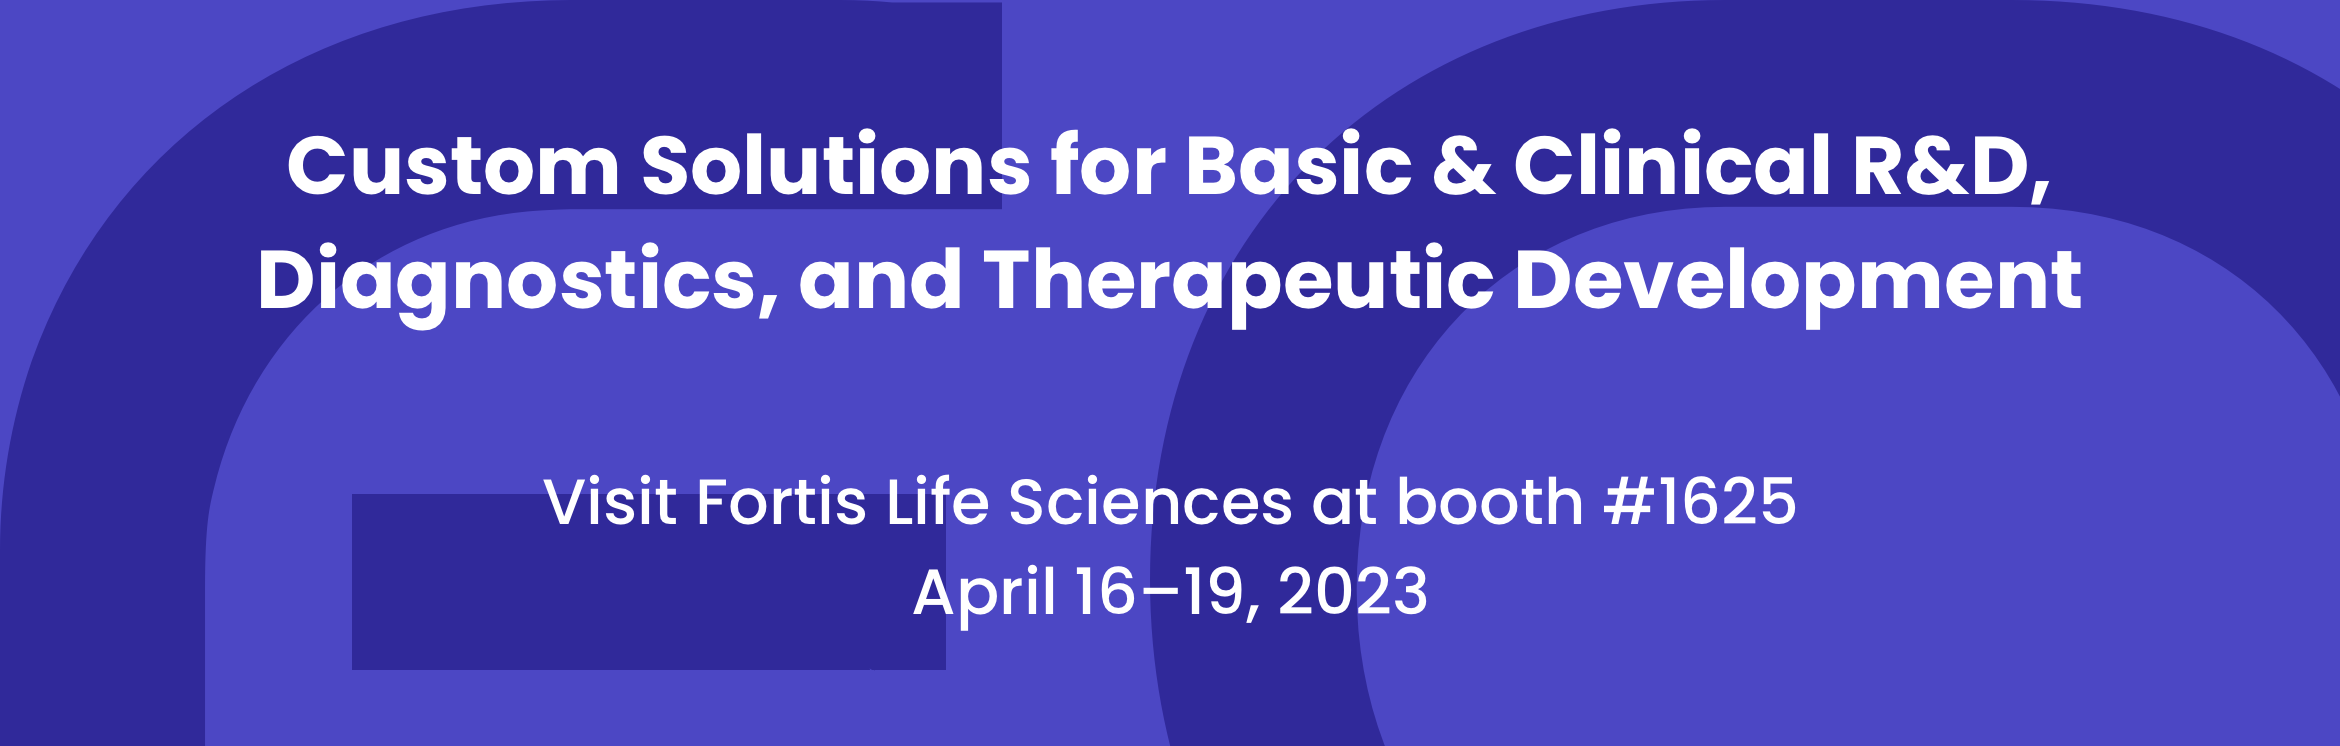 Custom Solutions for Basic & Clinical R&D, Diagnostics, and Therapeutic Development. Visit Fortis Life Sciences at booth #1625. April 16-19, 2023.